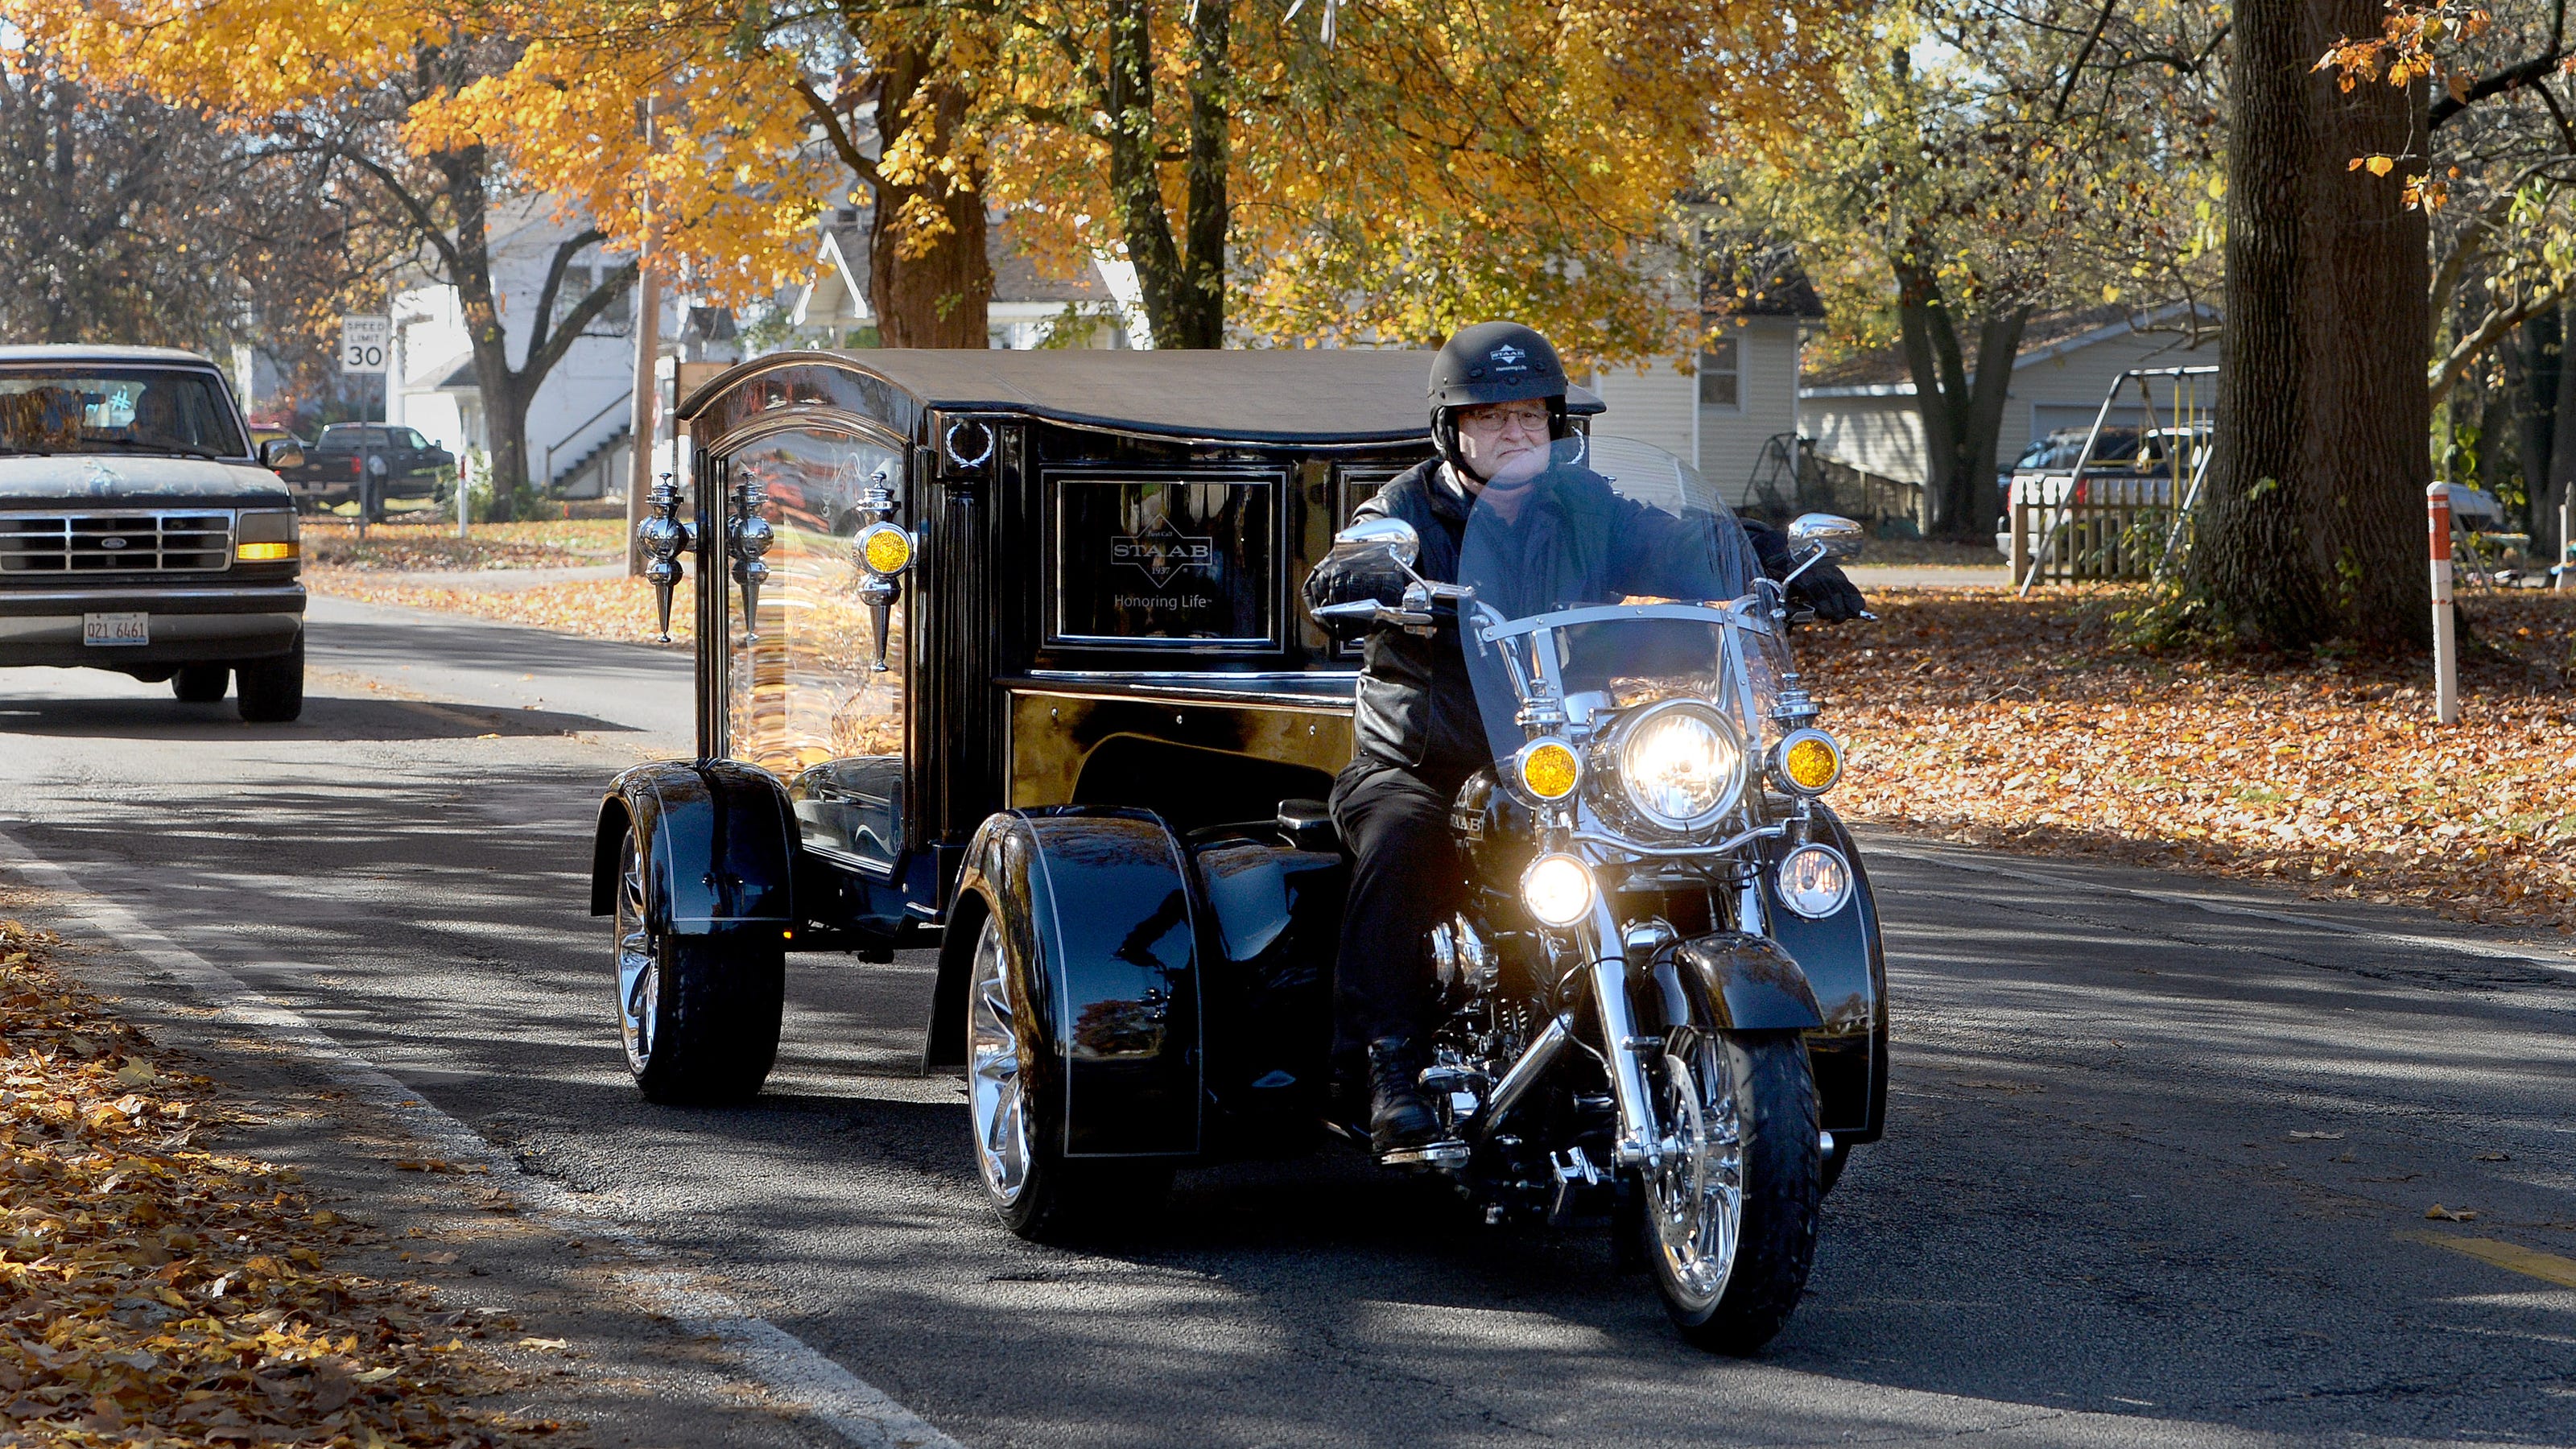  'I thought it might honor the young boy.' Funeral home lends touch on Hunter's final ride 